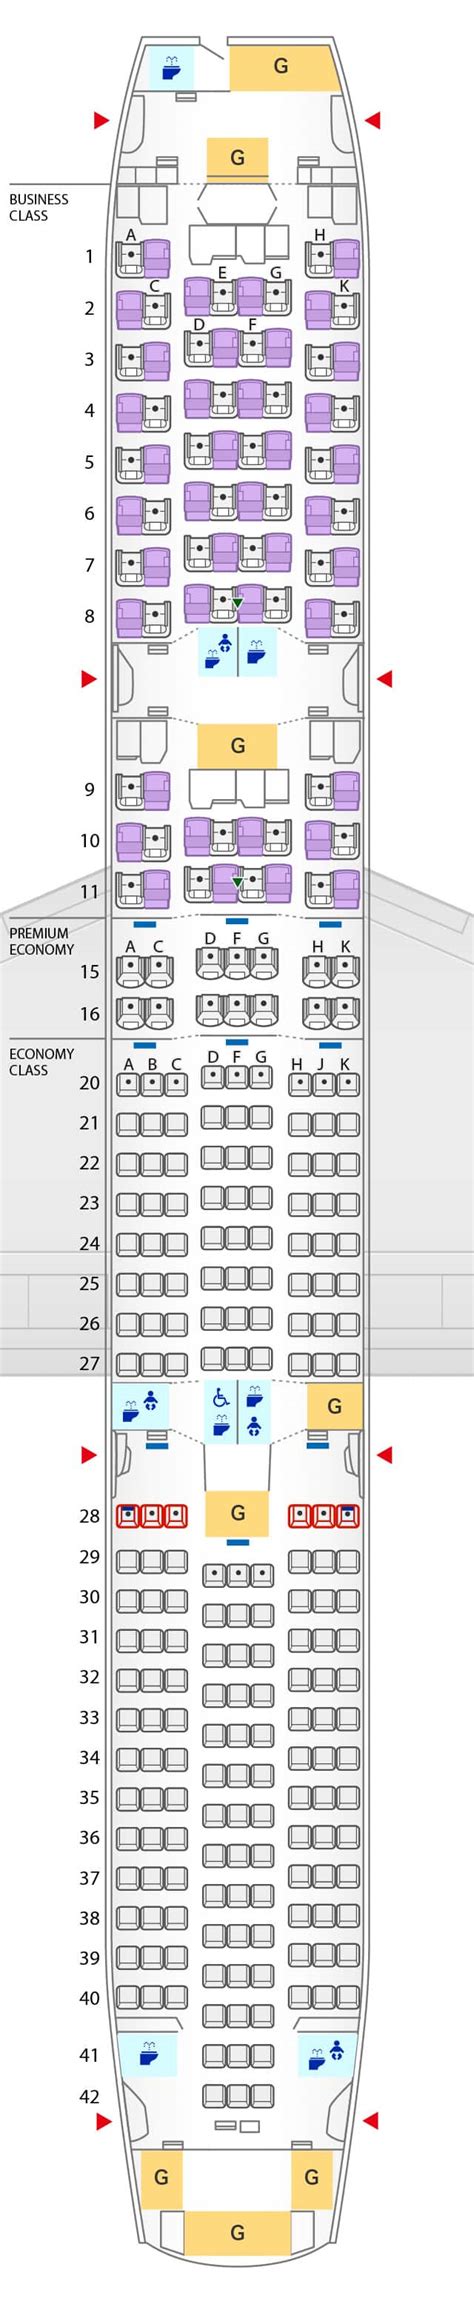 Boeing 787 9 dreamliner seat map. For your next American Airlines flight, use this seating chart to get the most comfortable seats, legroom, and recline on . 